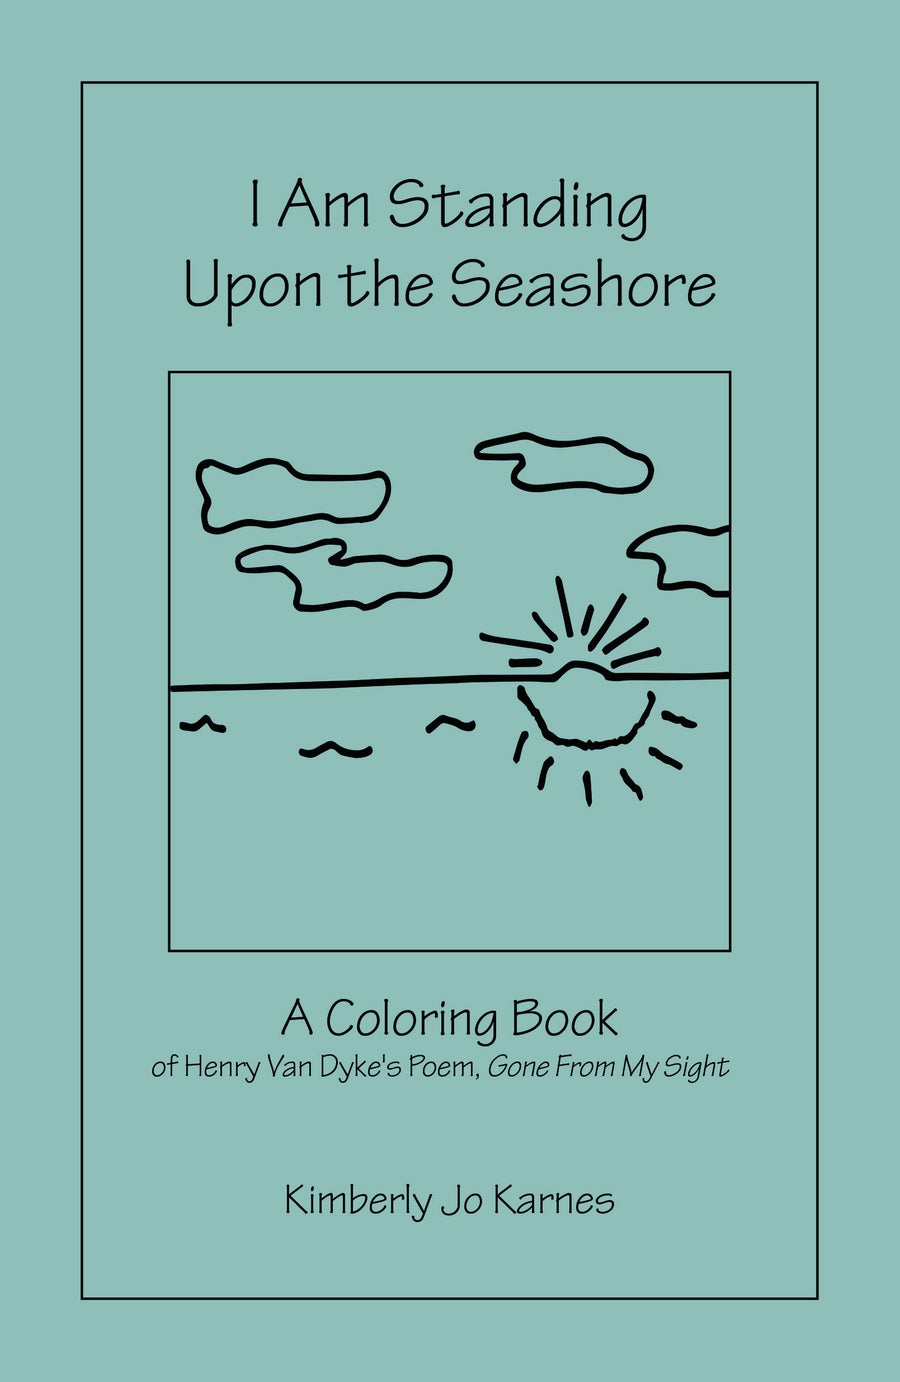 I Am Standing Upon the Seashore: End of Life Education, A Coloring Booklet